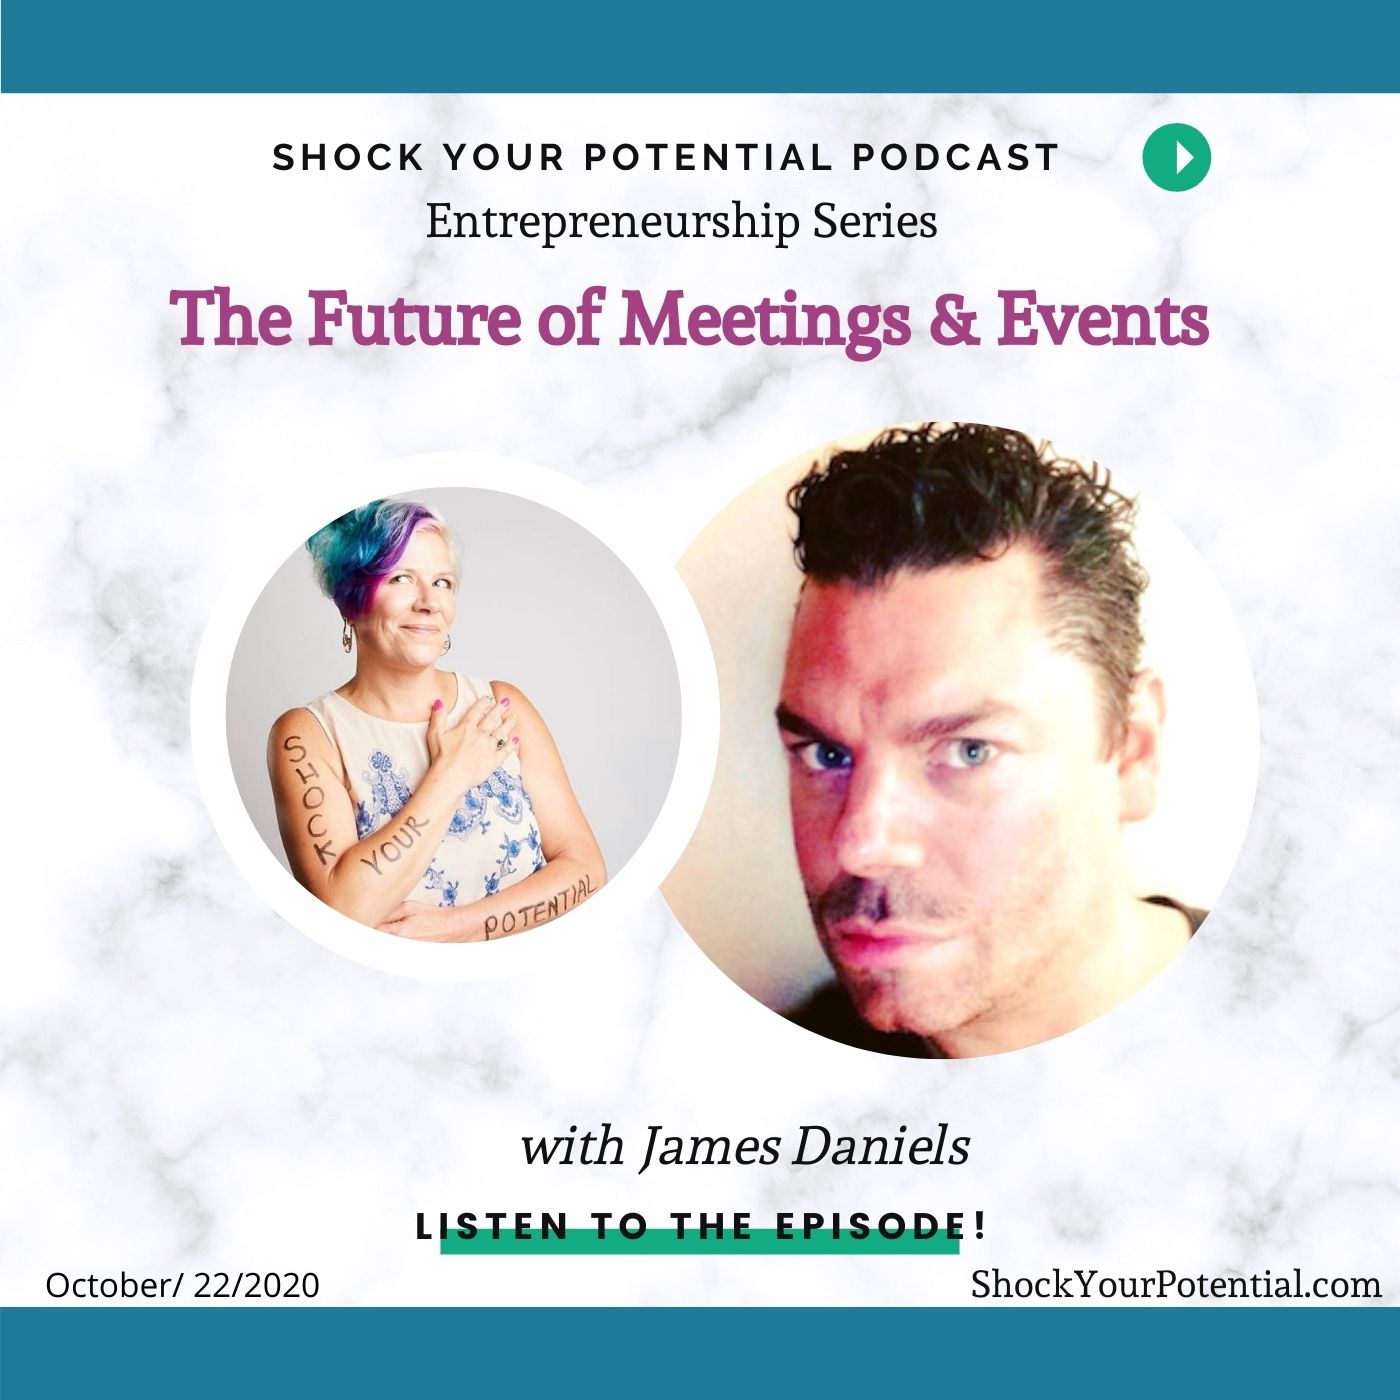 The Future of Meetings & Events – James Daniels